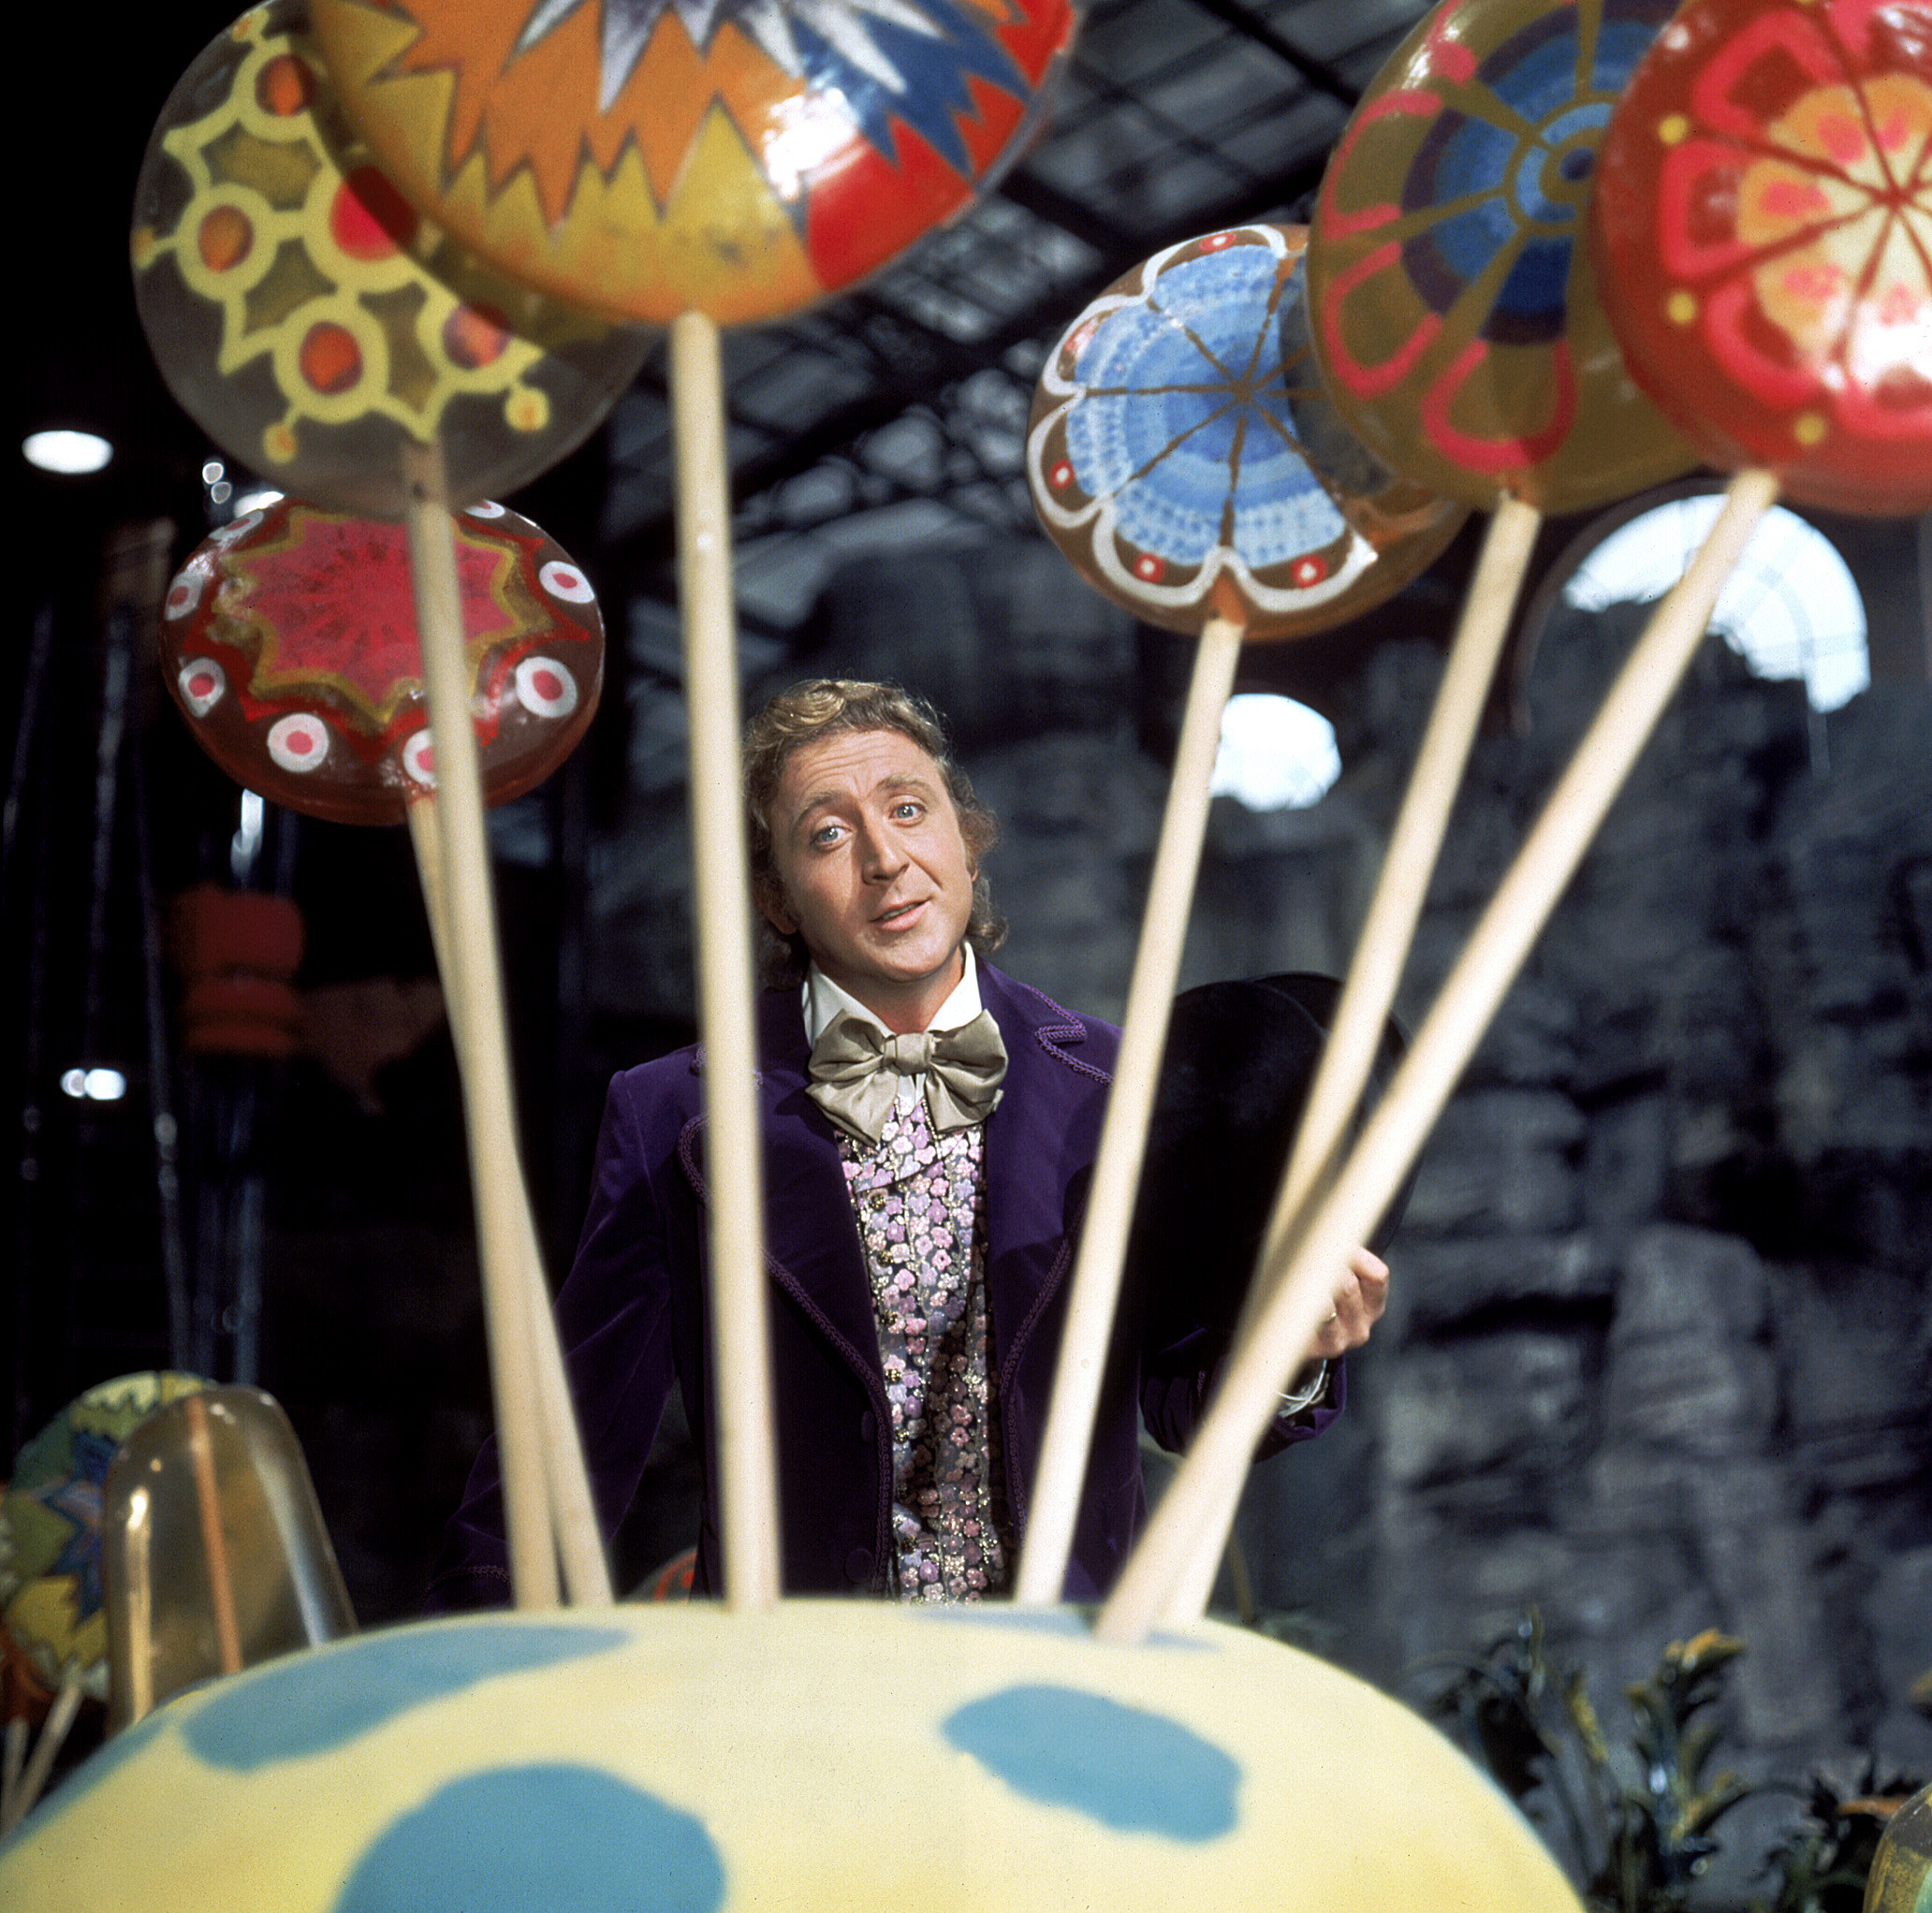 Wonka behind a bunch of giant lollipops